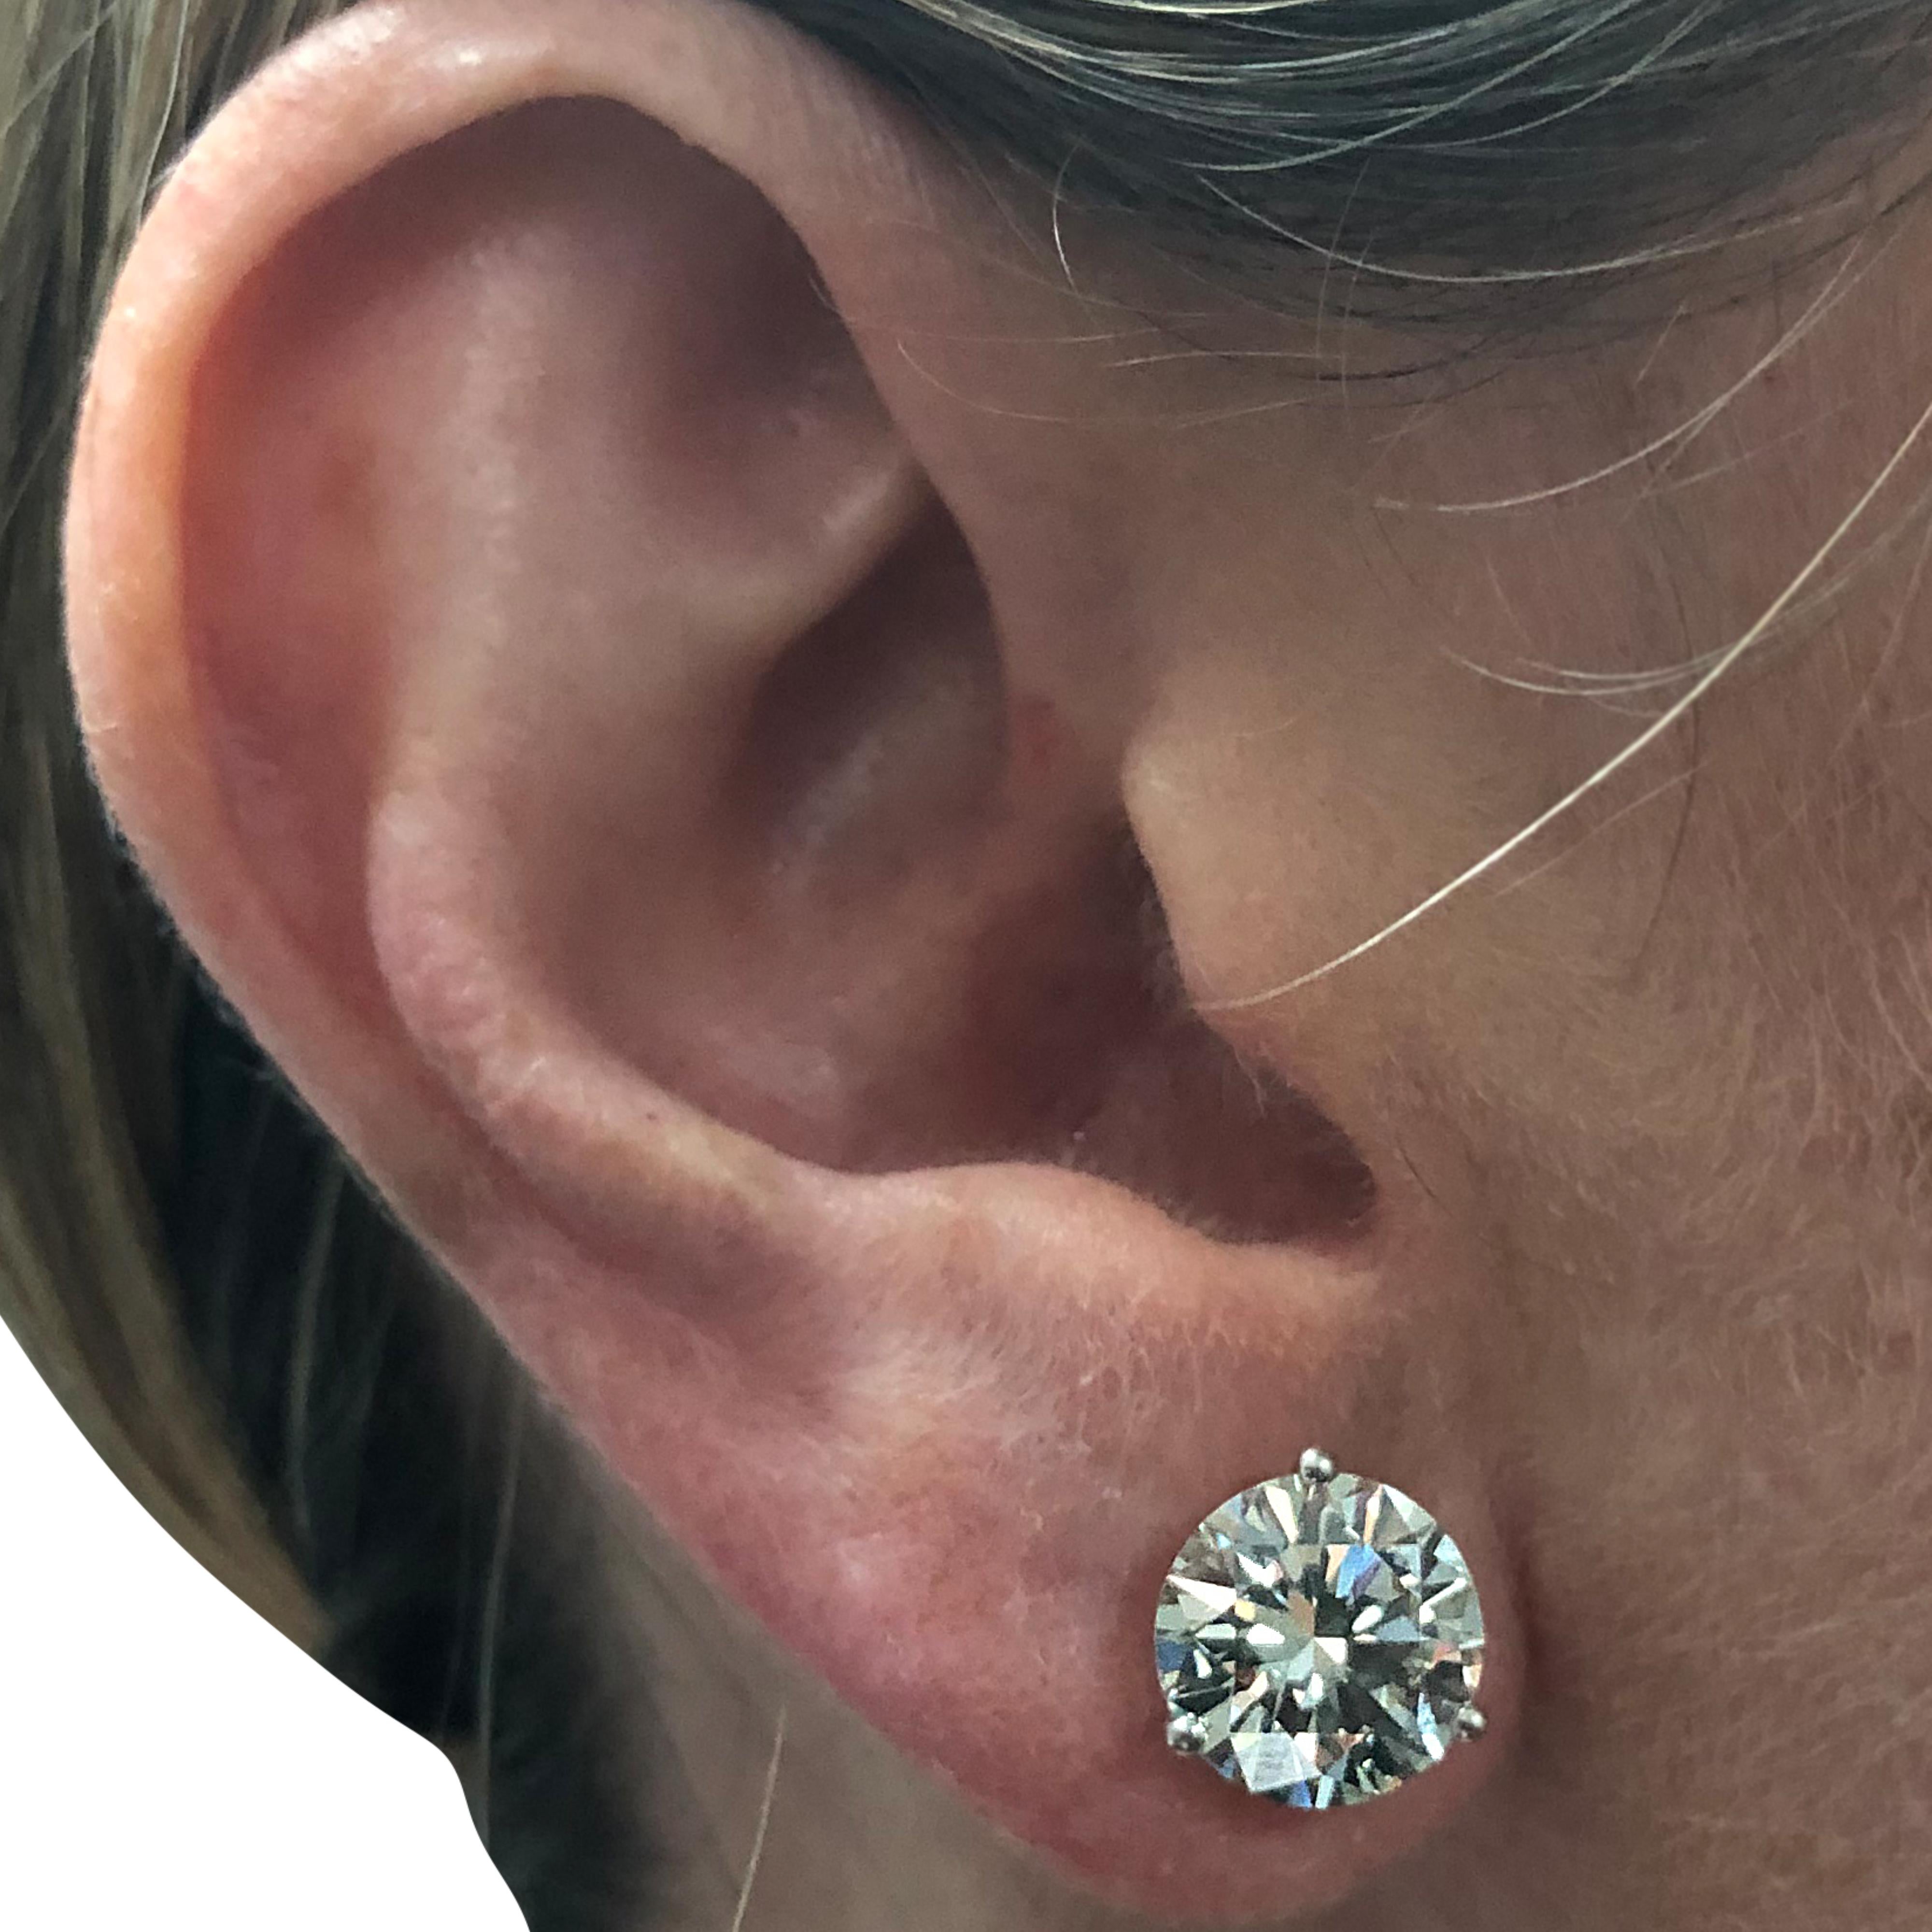 Stunning solitaire stud earrings crafted in white gold, showcasing 2 perfectly matched GIA certified round brilliant cut diamonds weighing 7.19 carats total, M color VS1-2 clarity, with excellent polish and symmetry. These gorgeous earrings are